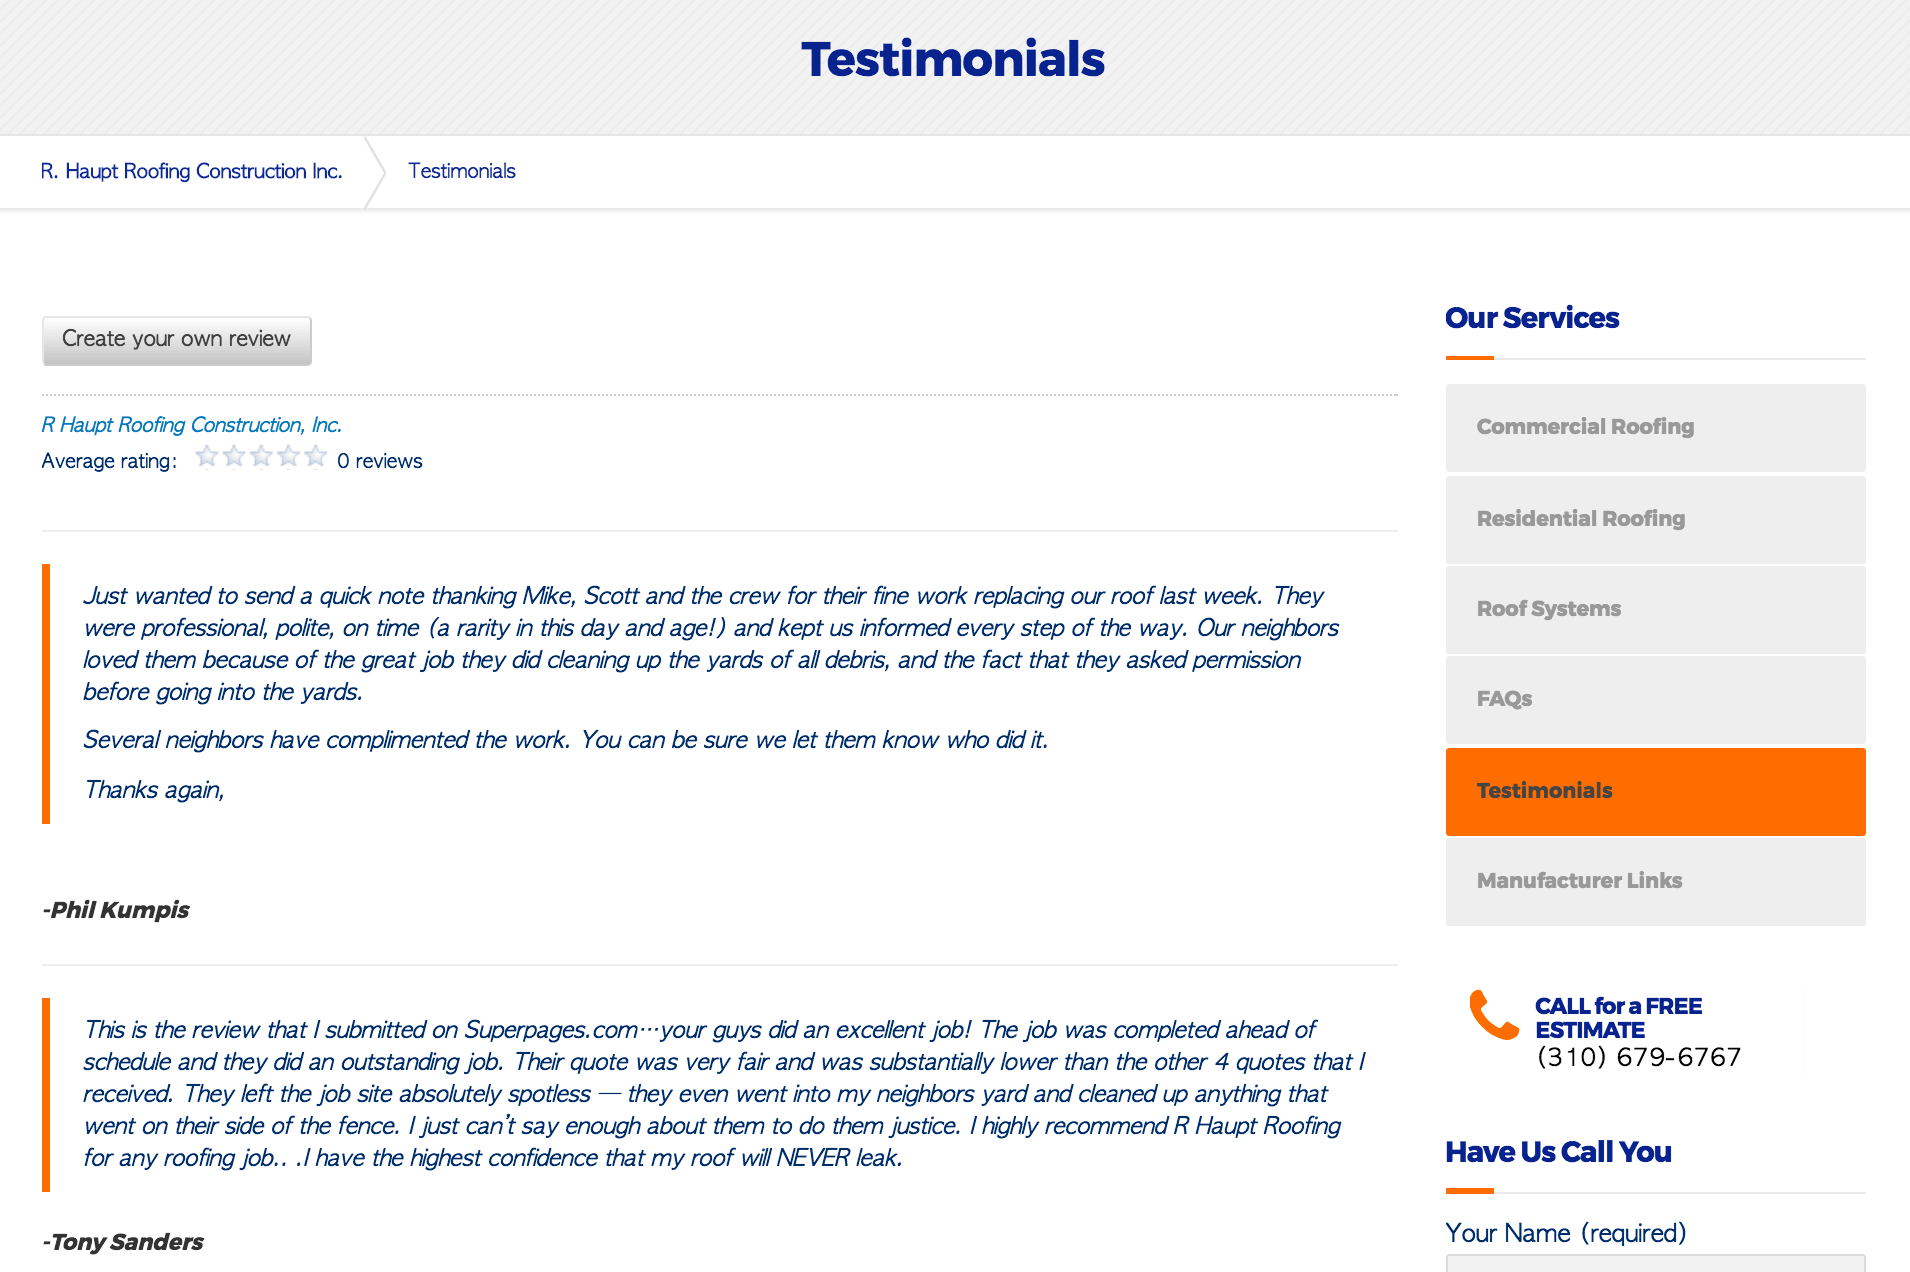 Example of featured testimonials on a roofing company website